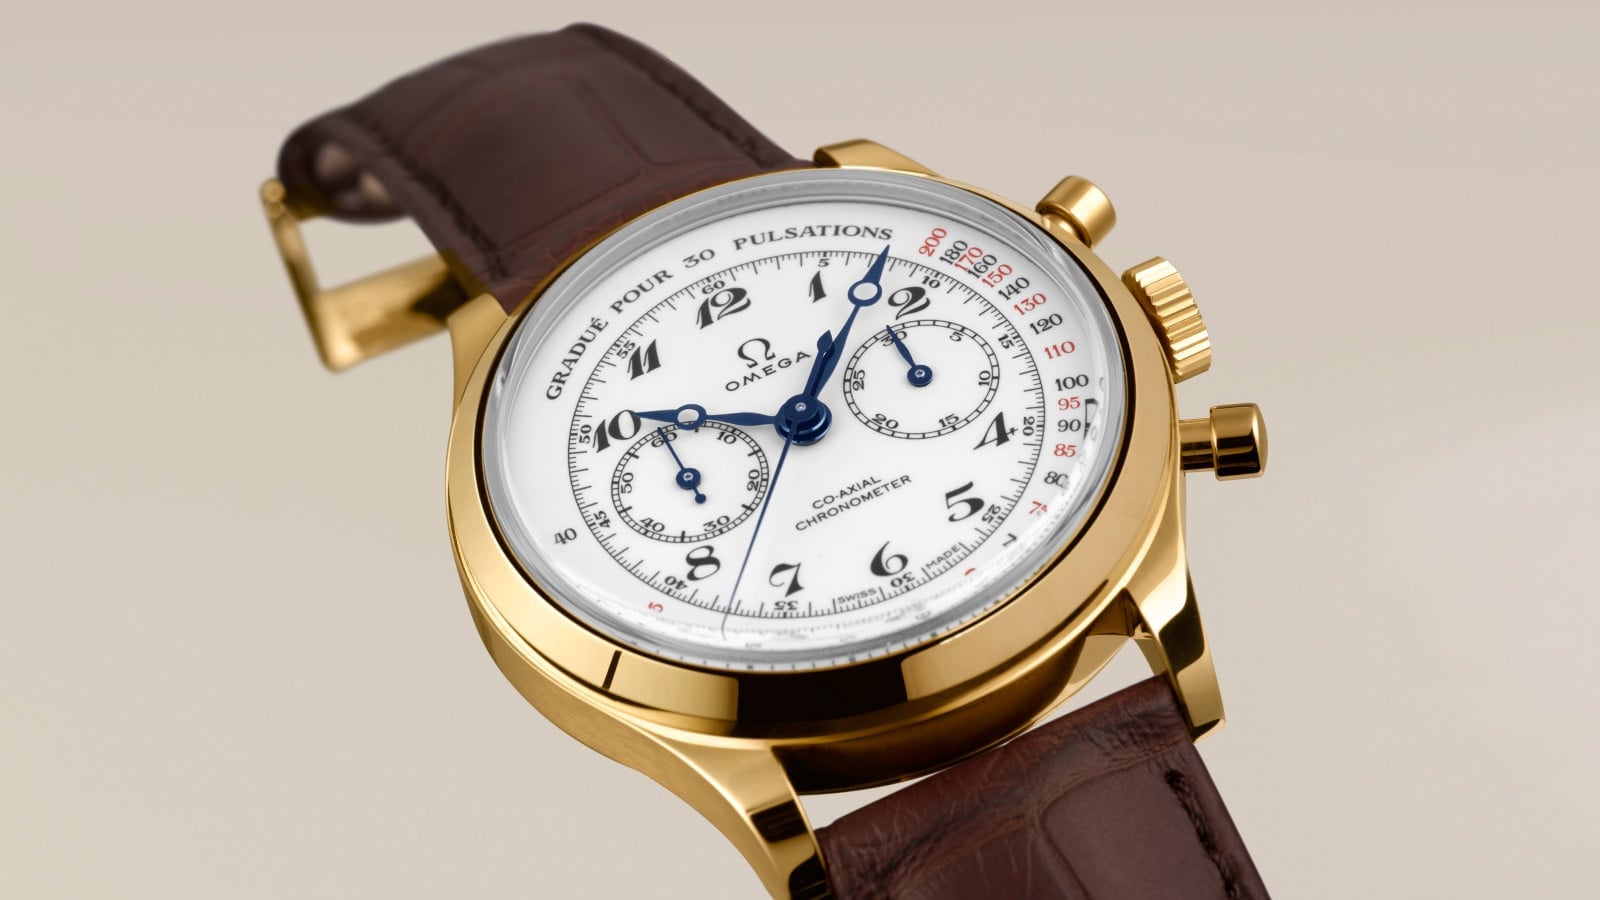 Replica Watch Sites That Accept Paypal